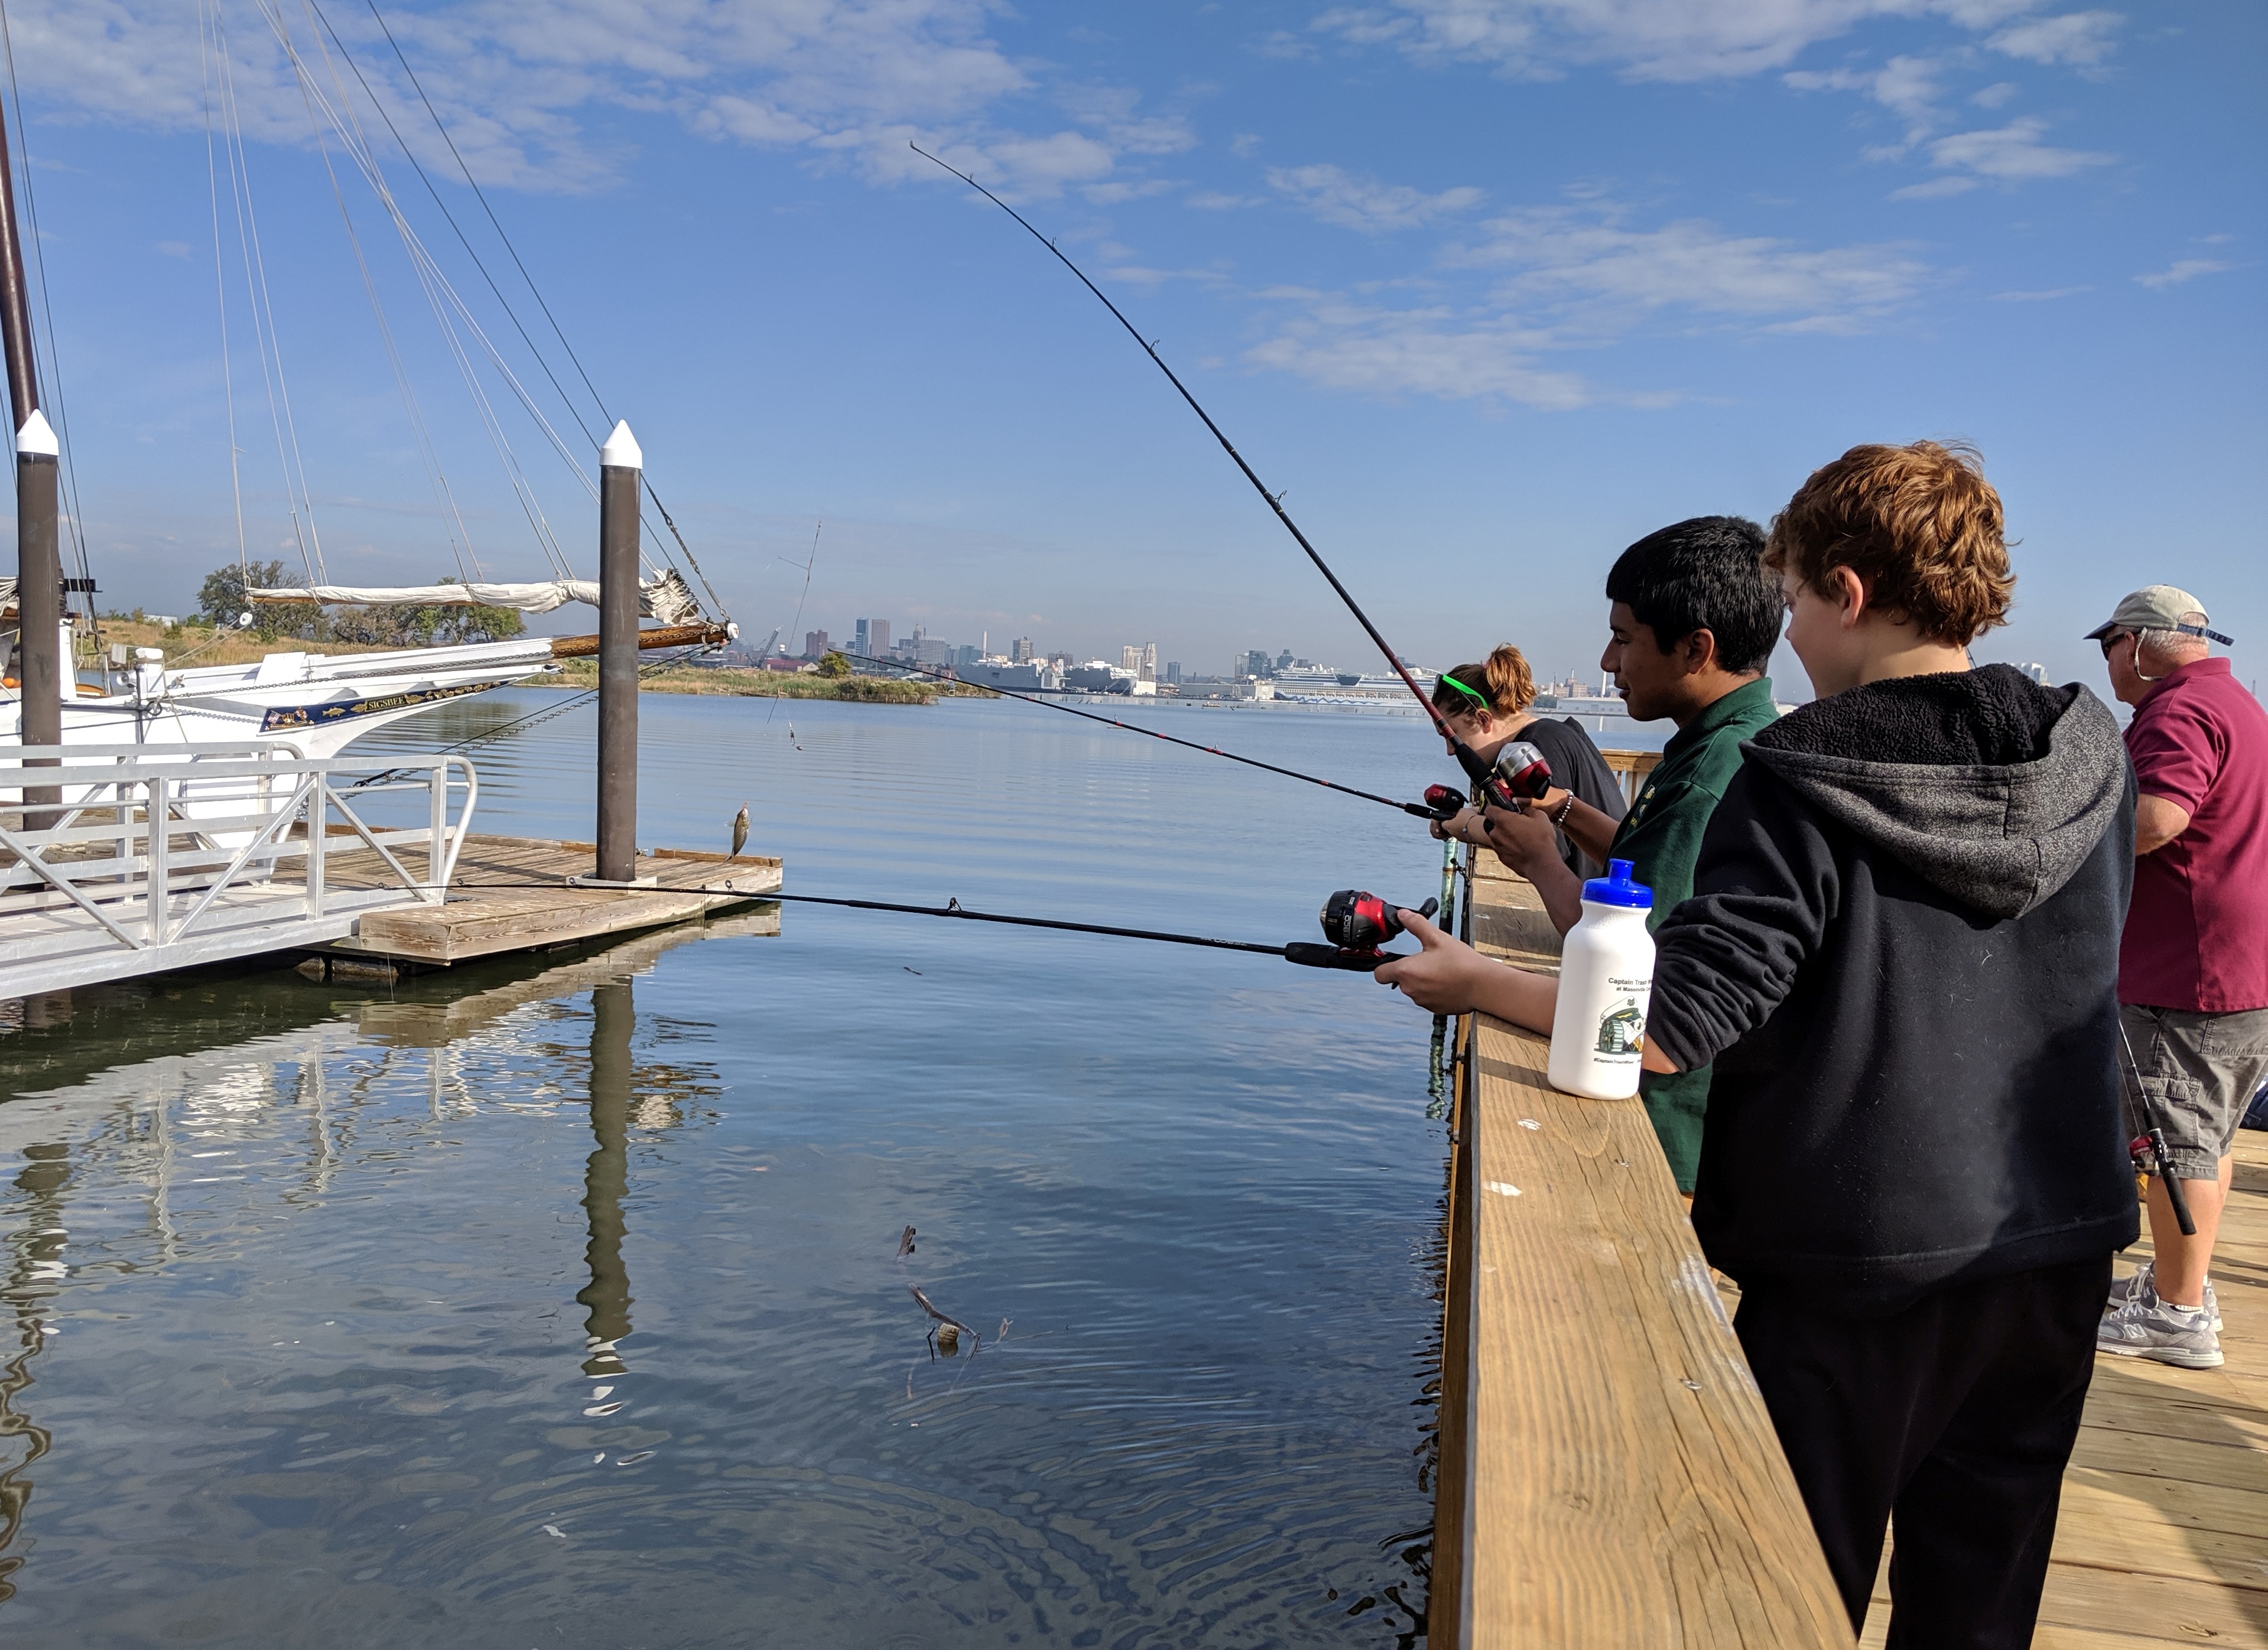 Fishing at the Masonville Cove pier in Baltimore | FWS.gov